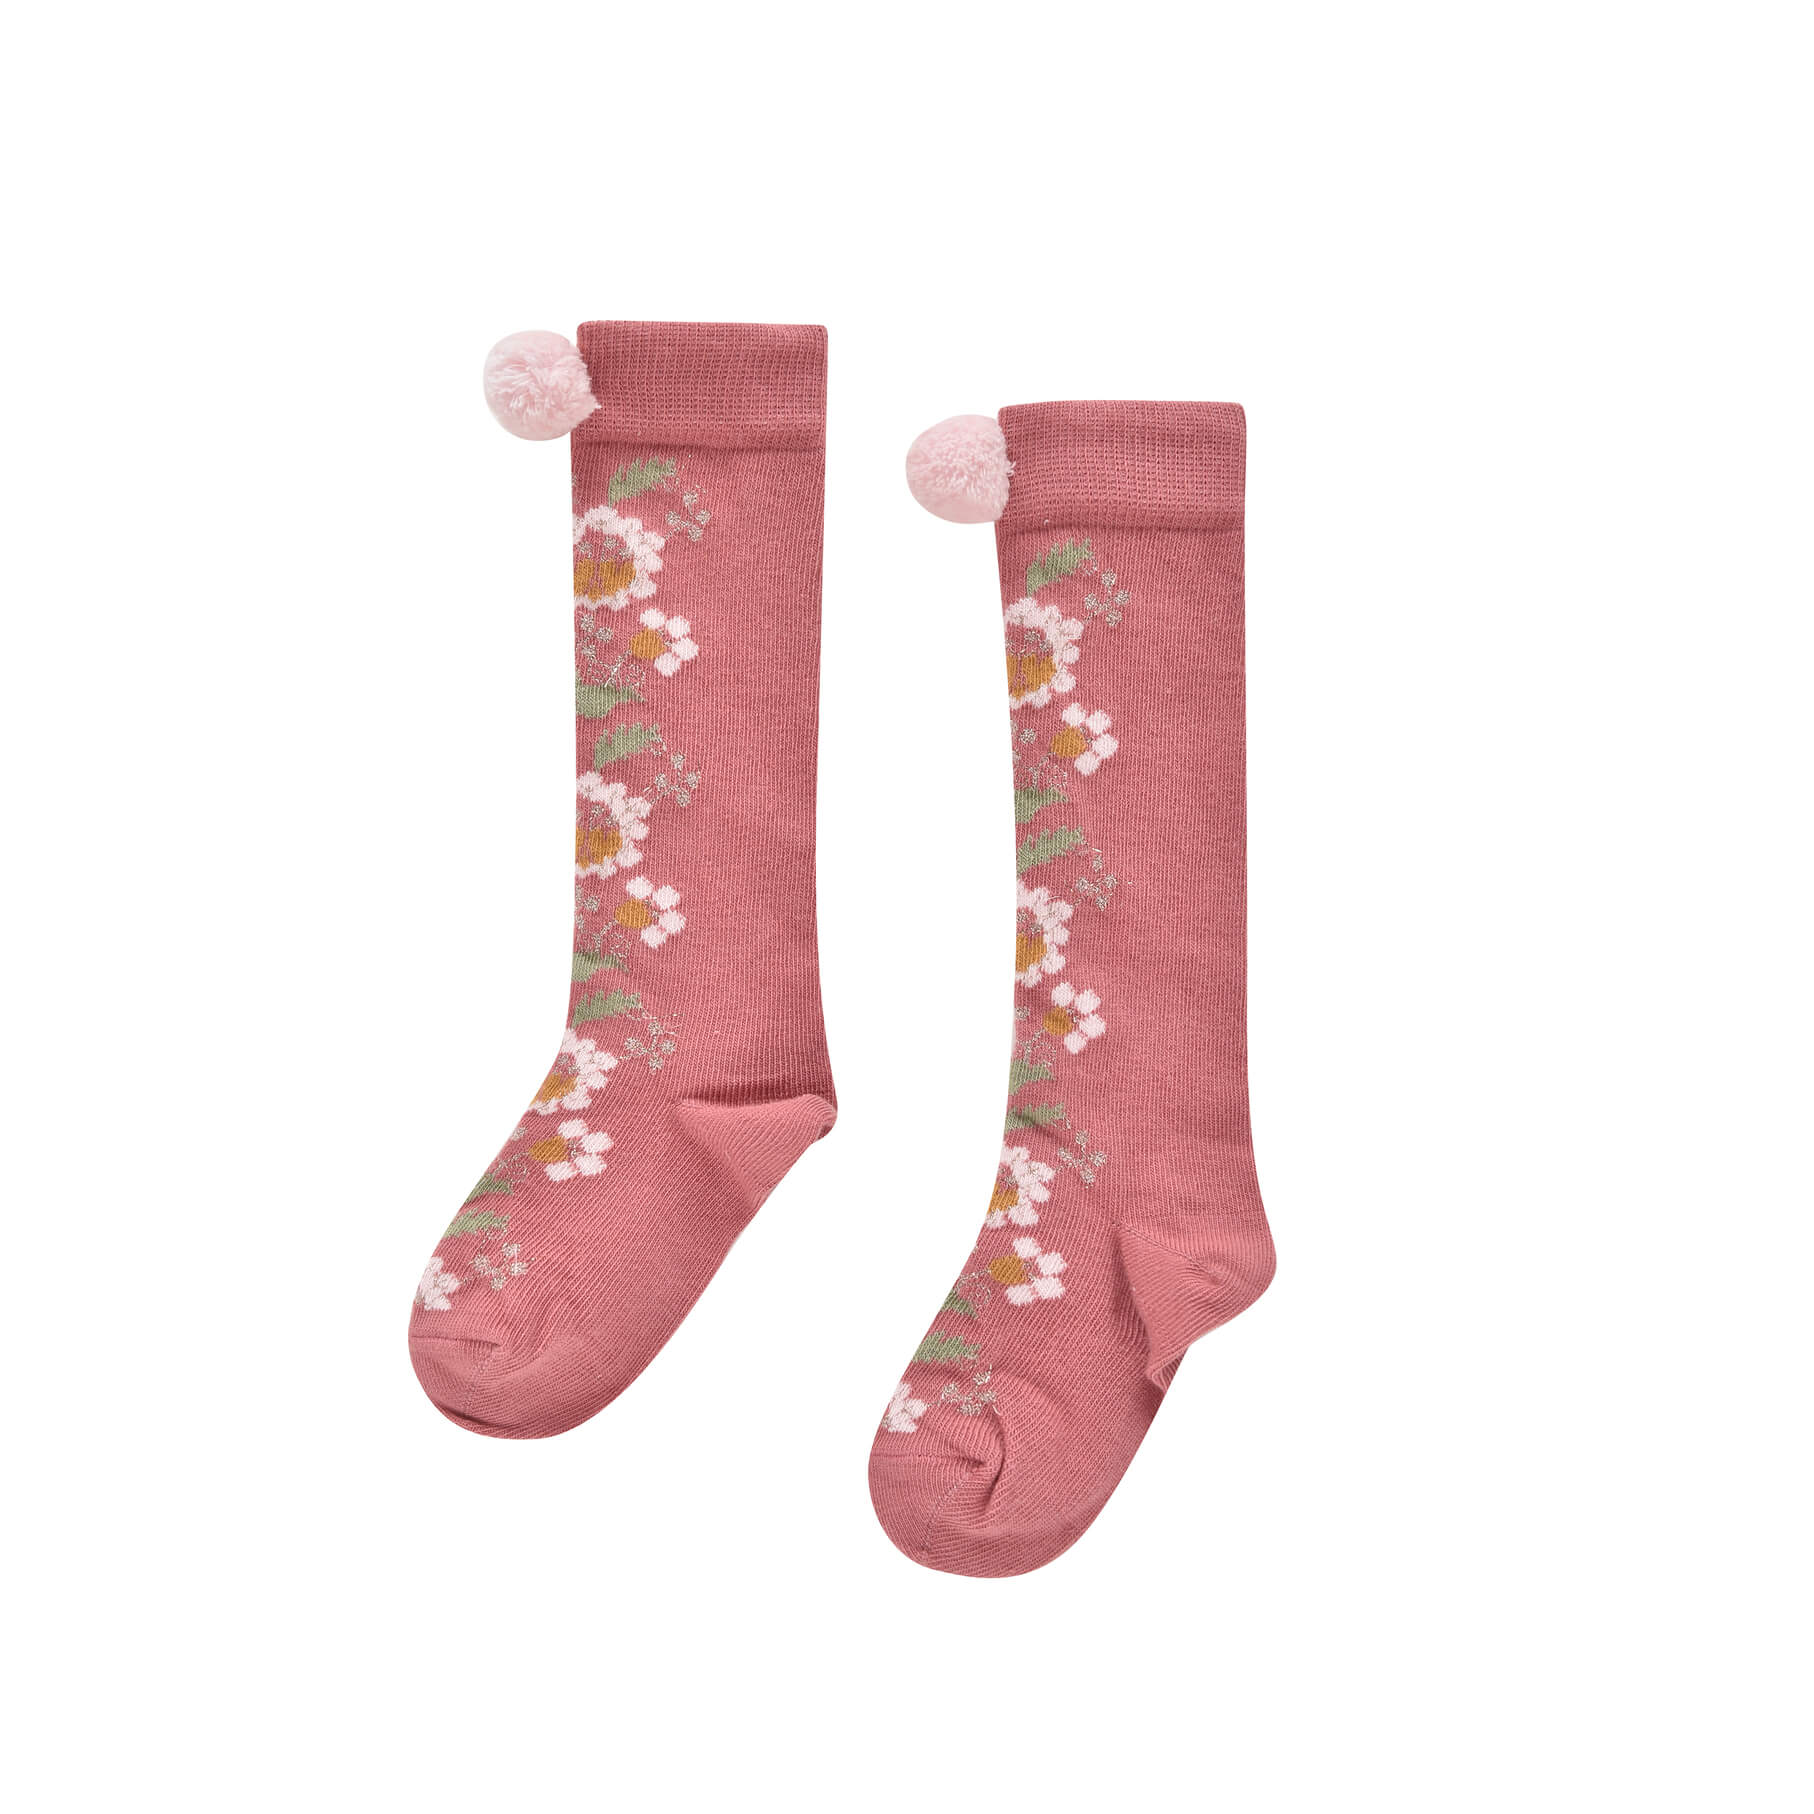 For every outfit, it's essential to have cute socks, and the Sienna socks in pink with floral patterns and handmade pompoms by Louise Misha are perfect for little girls. MiliMilu is the go-to online store in Hong Kong and Singapore for practical and stylish baby accessories, as well as the best baby girl gifts.